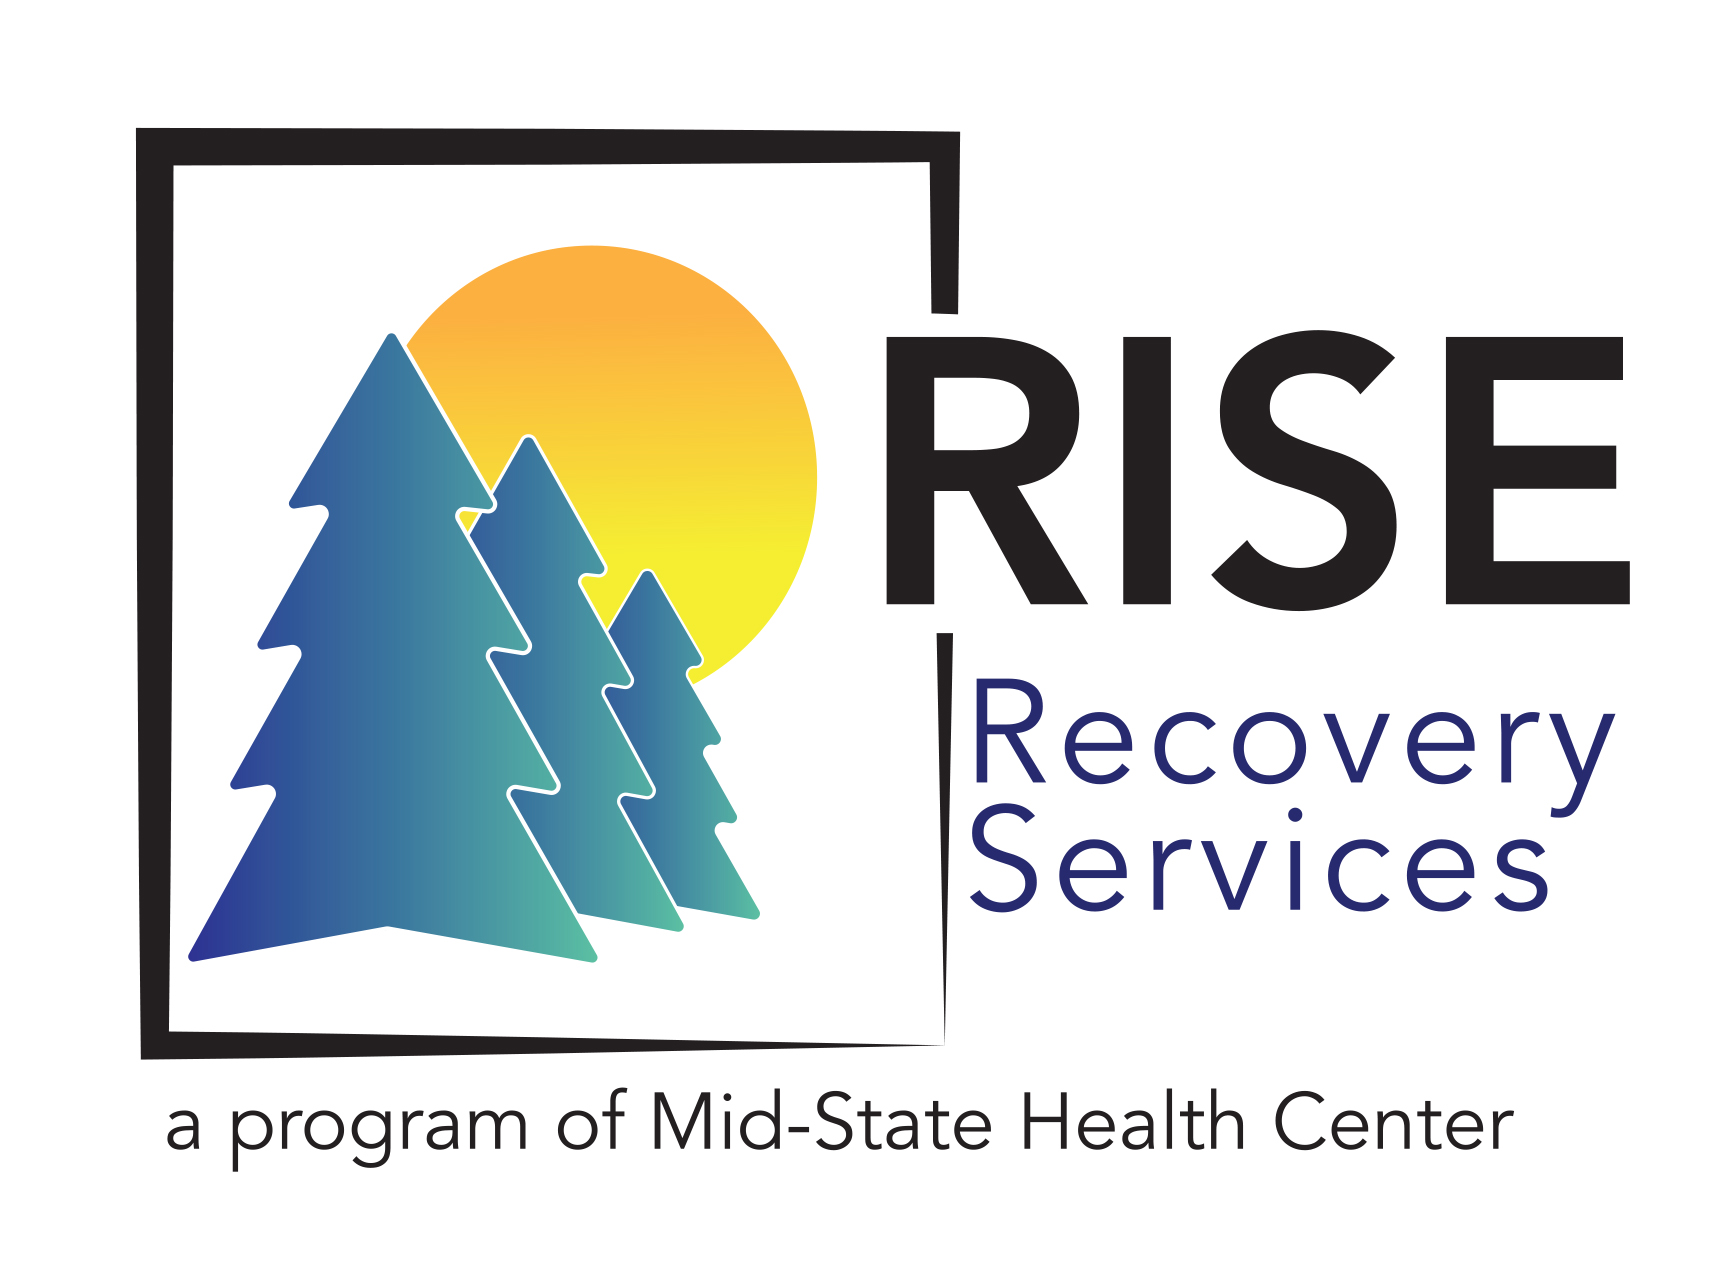 RISE Recovery